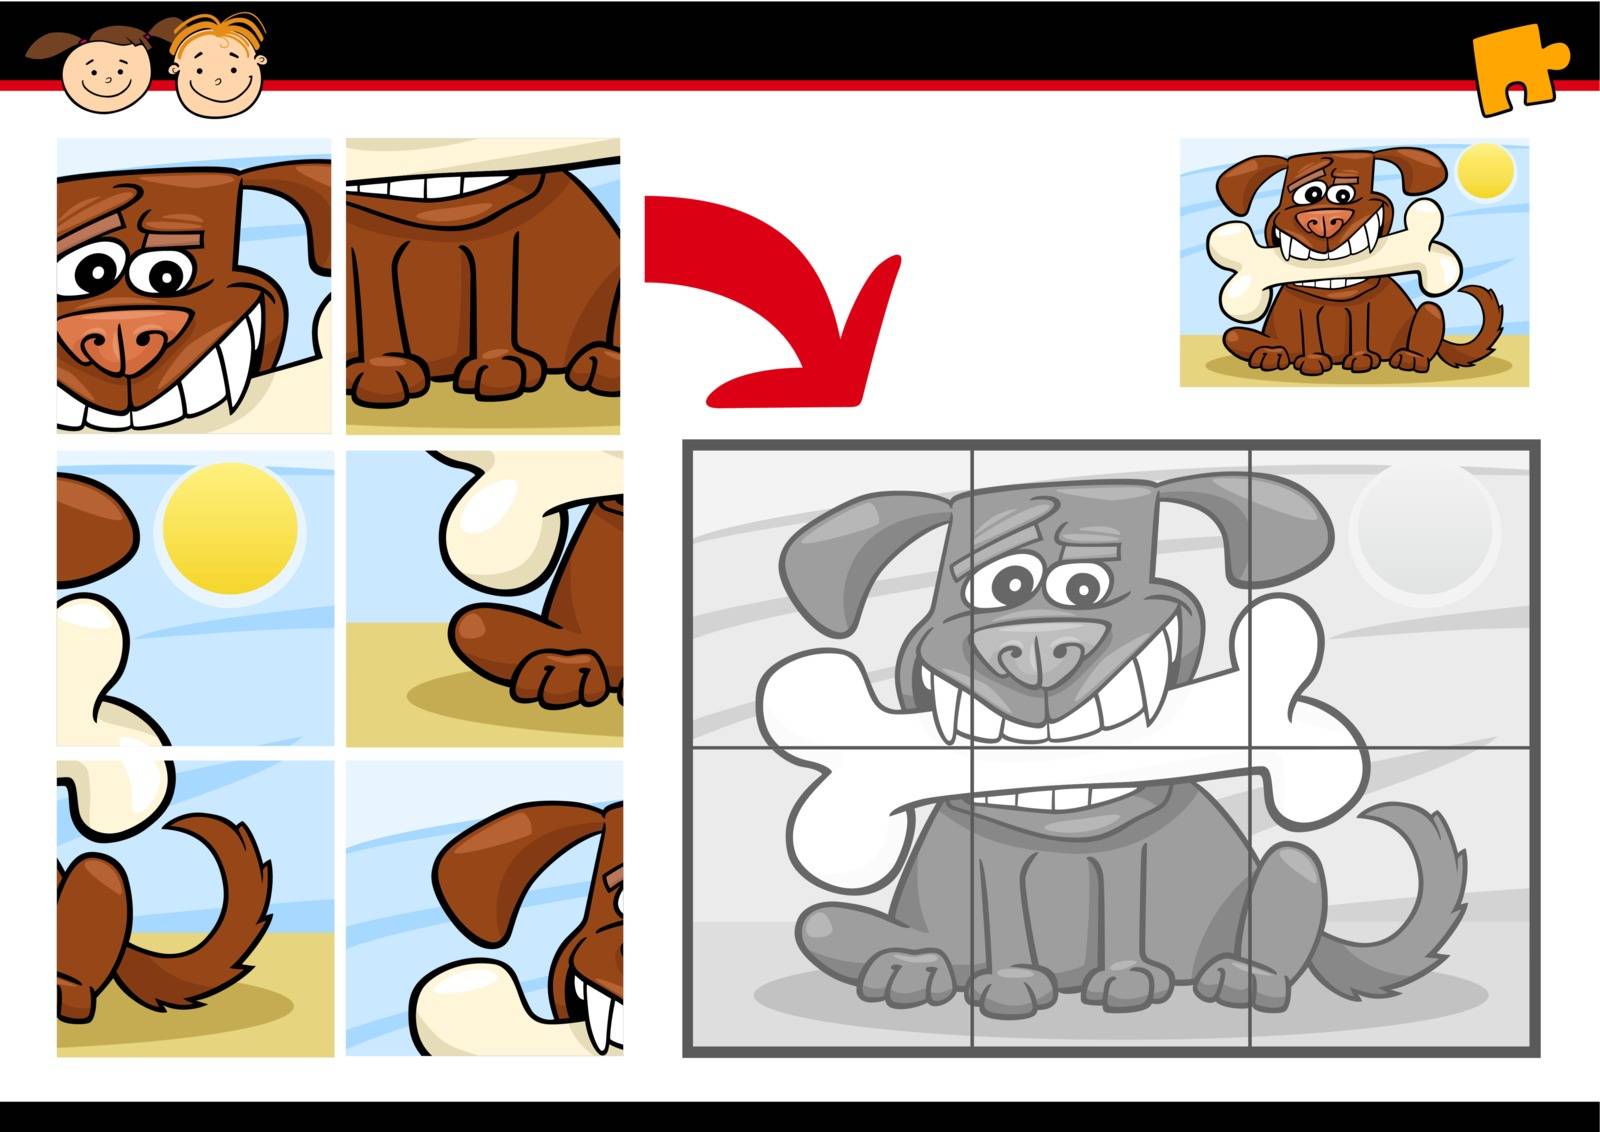 Cartoon Illustration of Education Jigsaw Puzzle Game for Preschool Children with Funny Dog and Bone